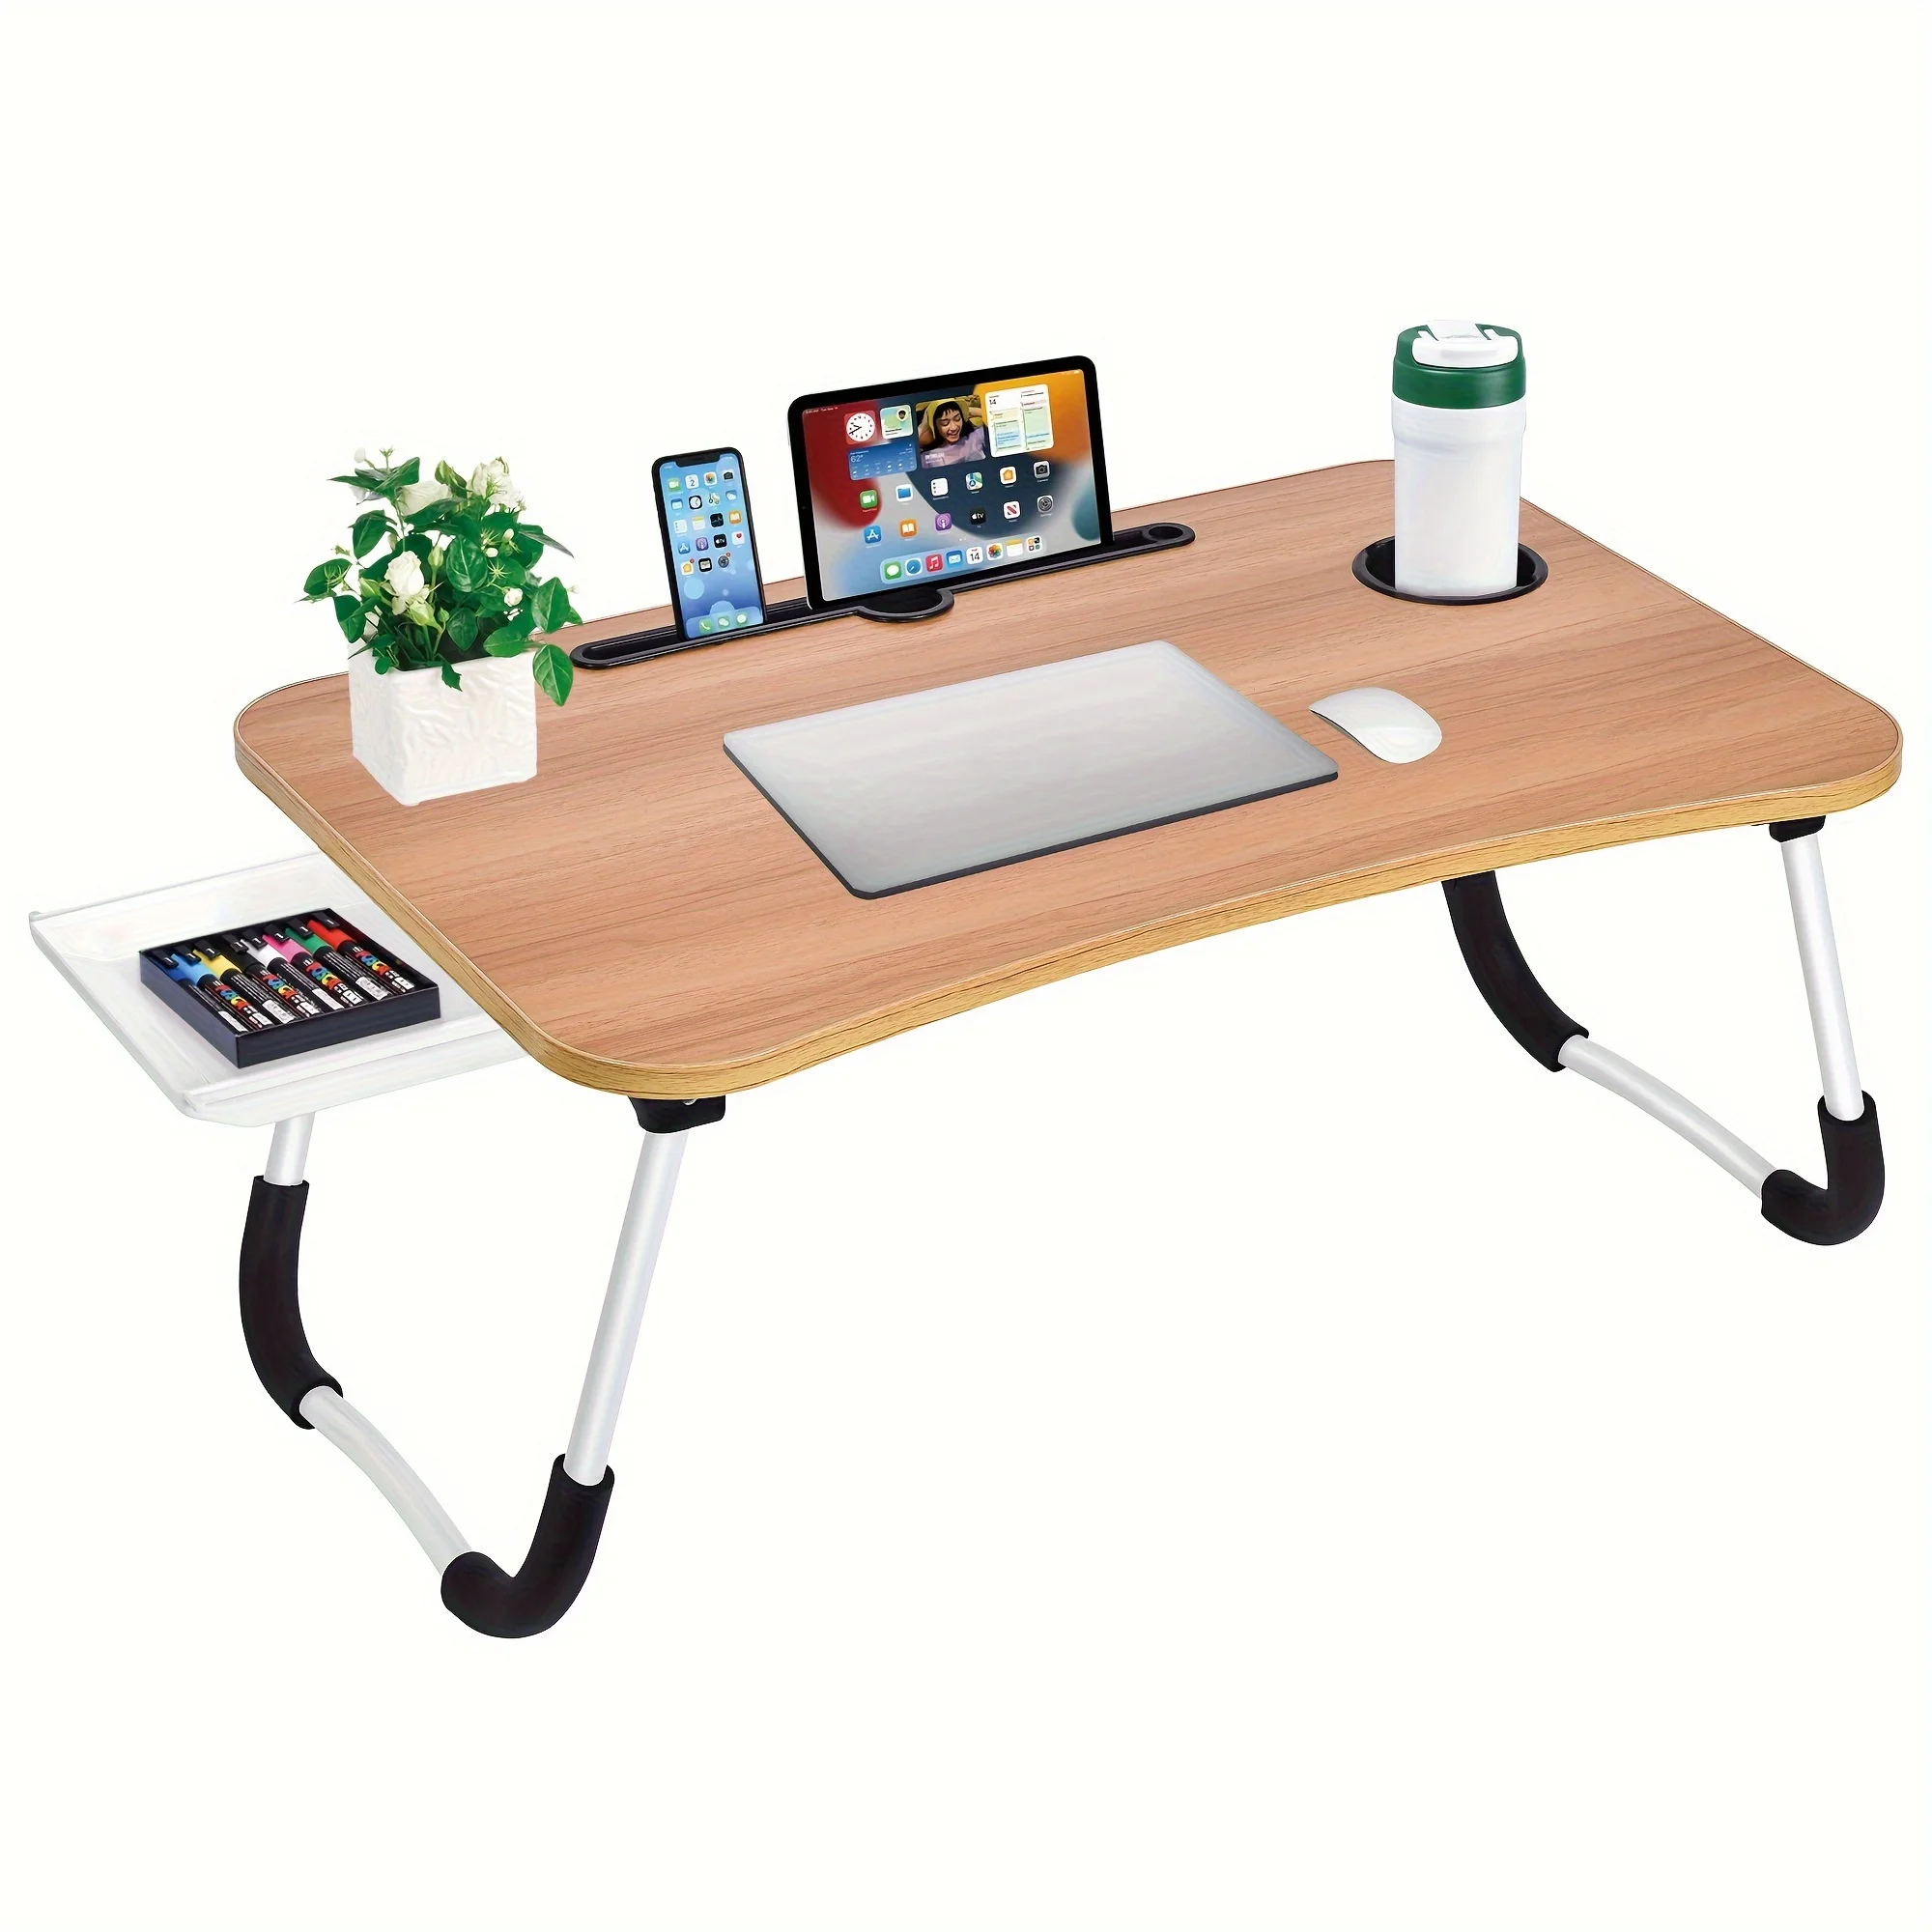 

Laptop Bed Desk Table Tray Stand with Cup Holder/Drawer for Bed/Sofa/Couch/Study/Reading/Writing On Low Sitting Floor Large Port